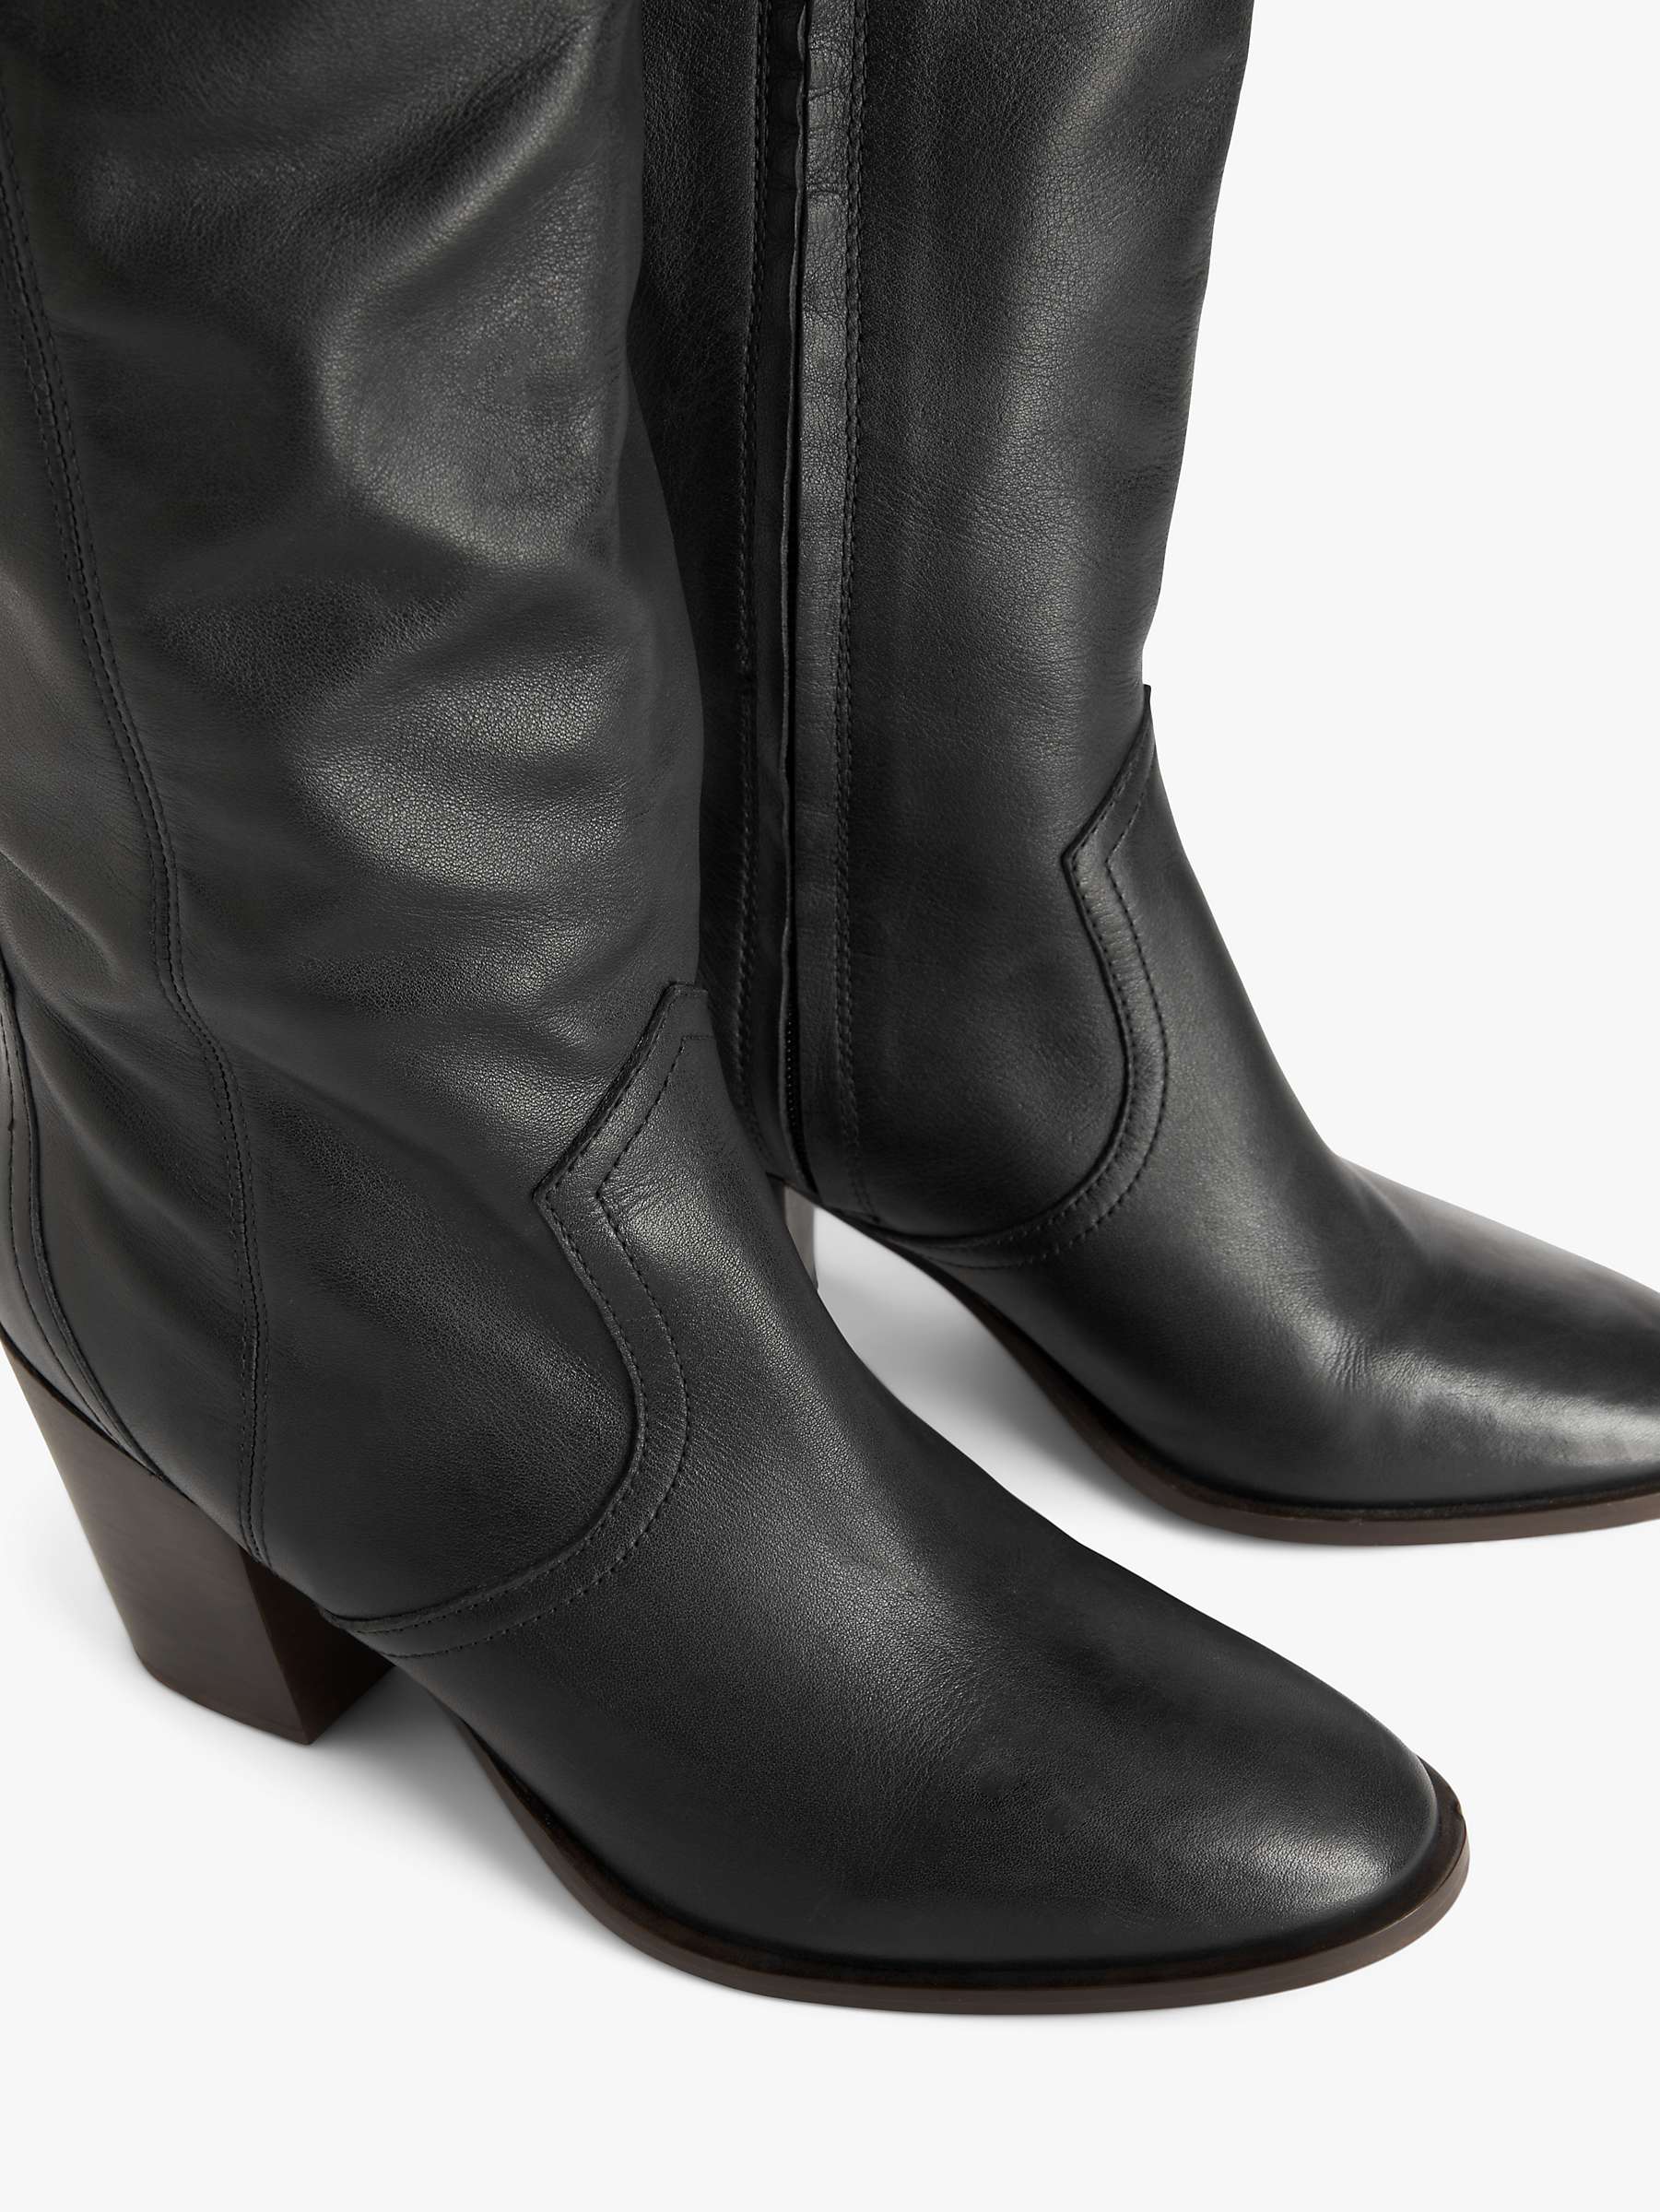 AND/OR Shilouh Leather Heeled Over The Knee Western Boots, Black at ...